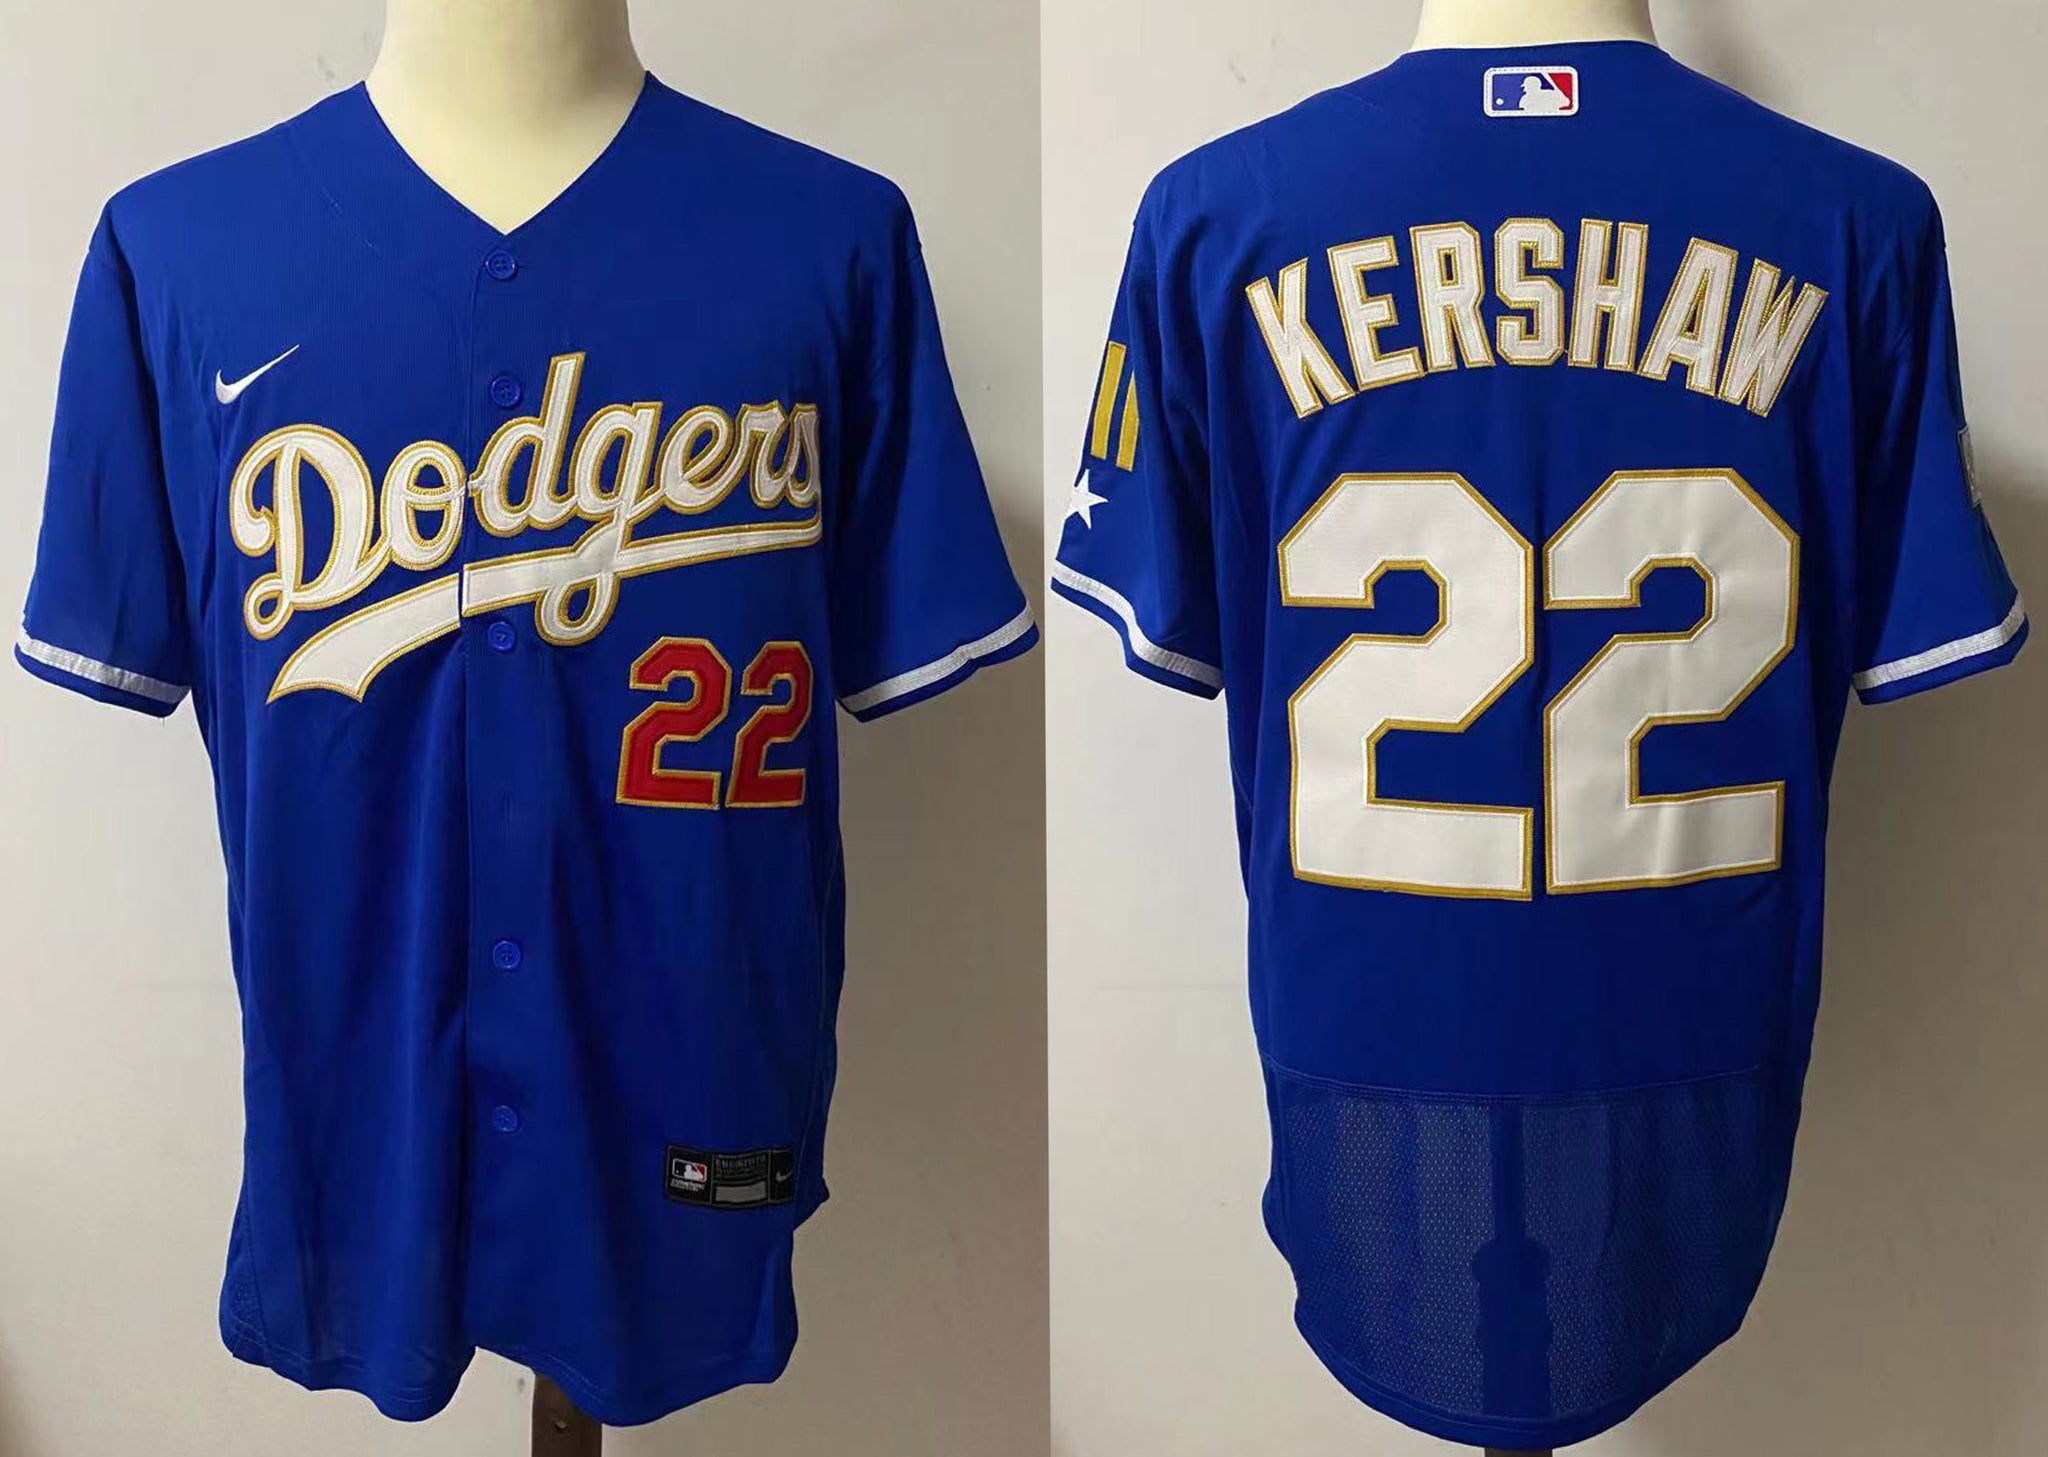 youth kershaw jersey